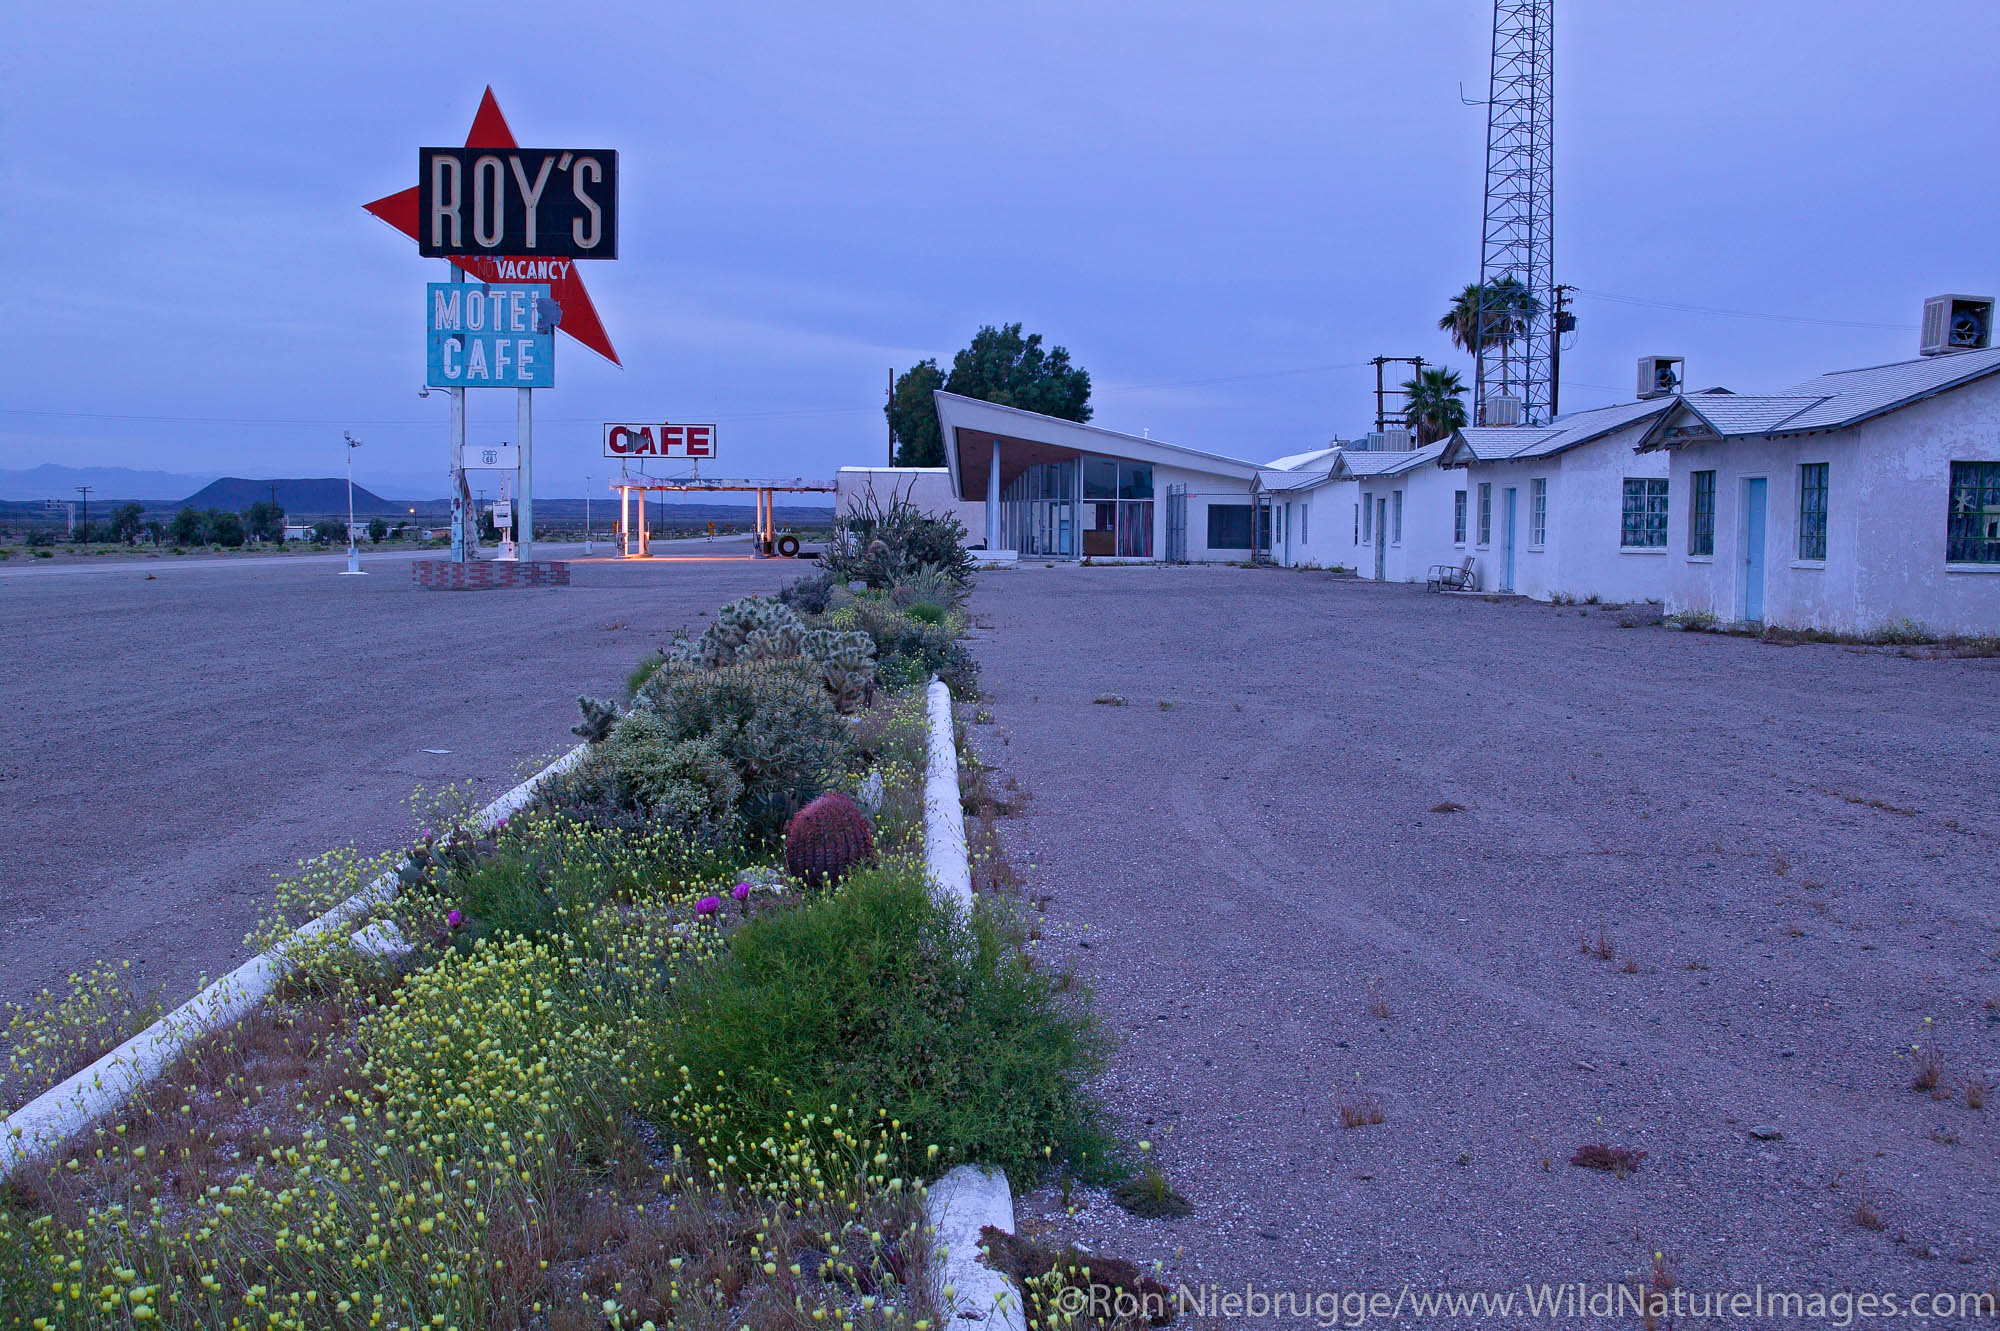 Roy's Cafe, motel and gas station along Route 66, Amboy, California.